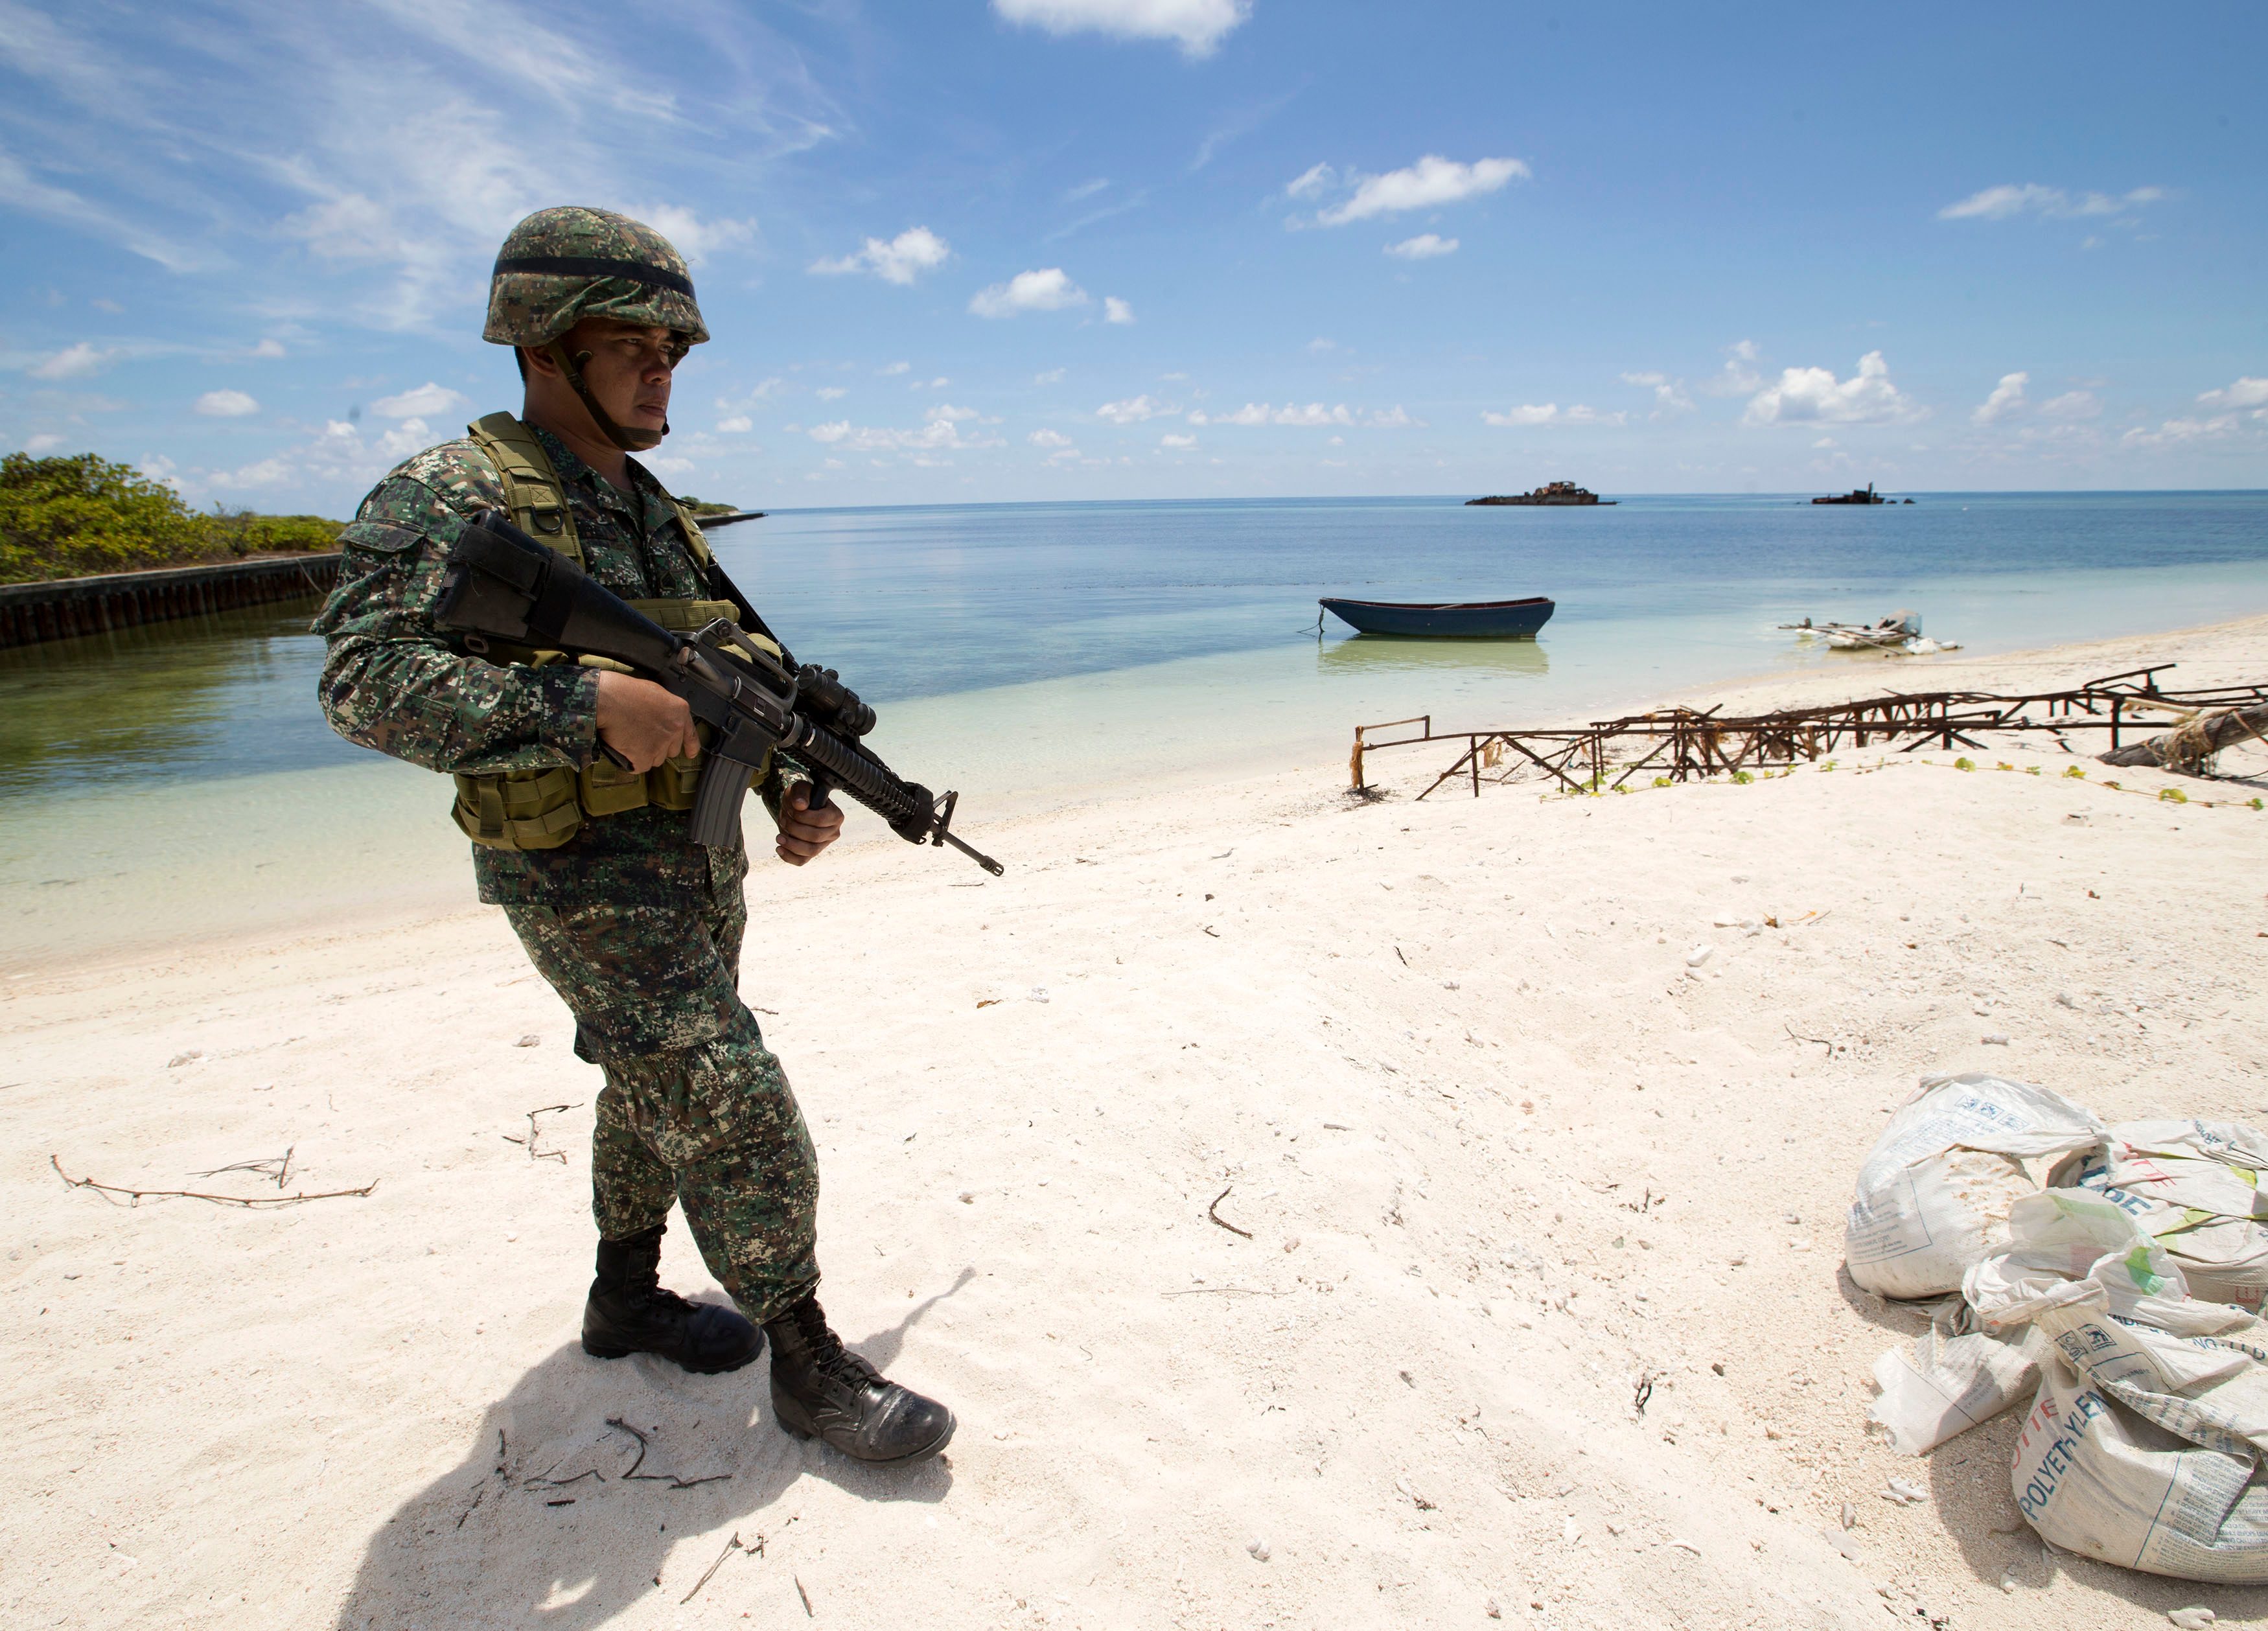 MARINE. Filipino soldier Tychico Octobre patrols on the shores of Pagasa (Thitu) island  in the Spratlys. Photo by Ritchie Tongo/EPA      